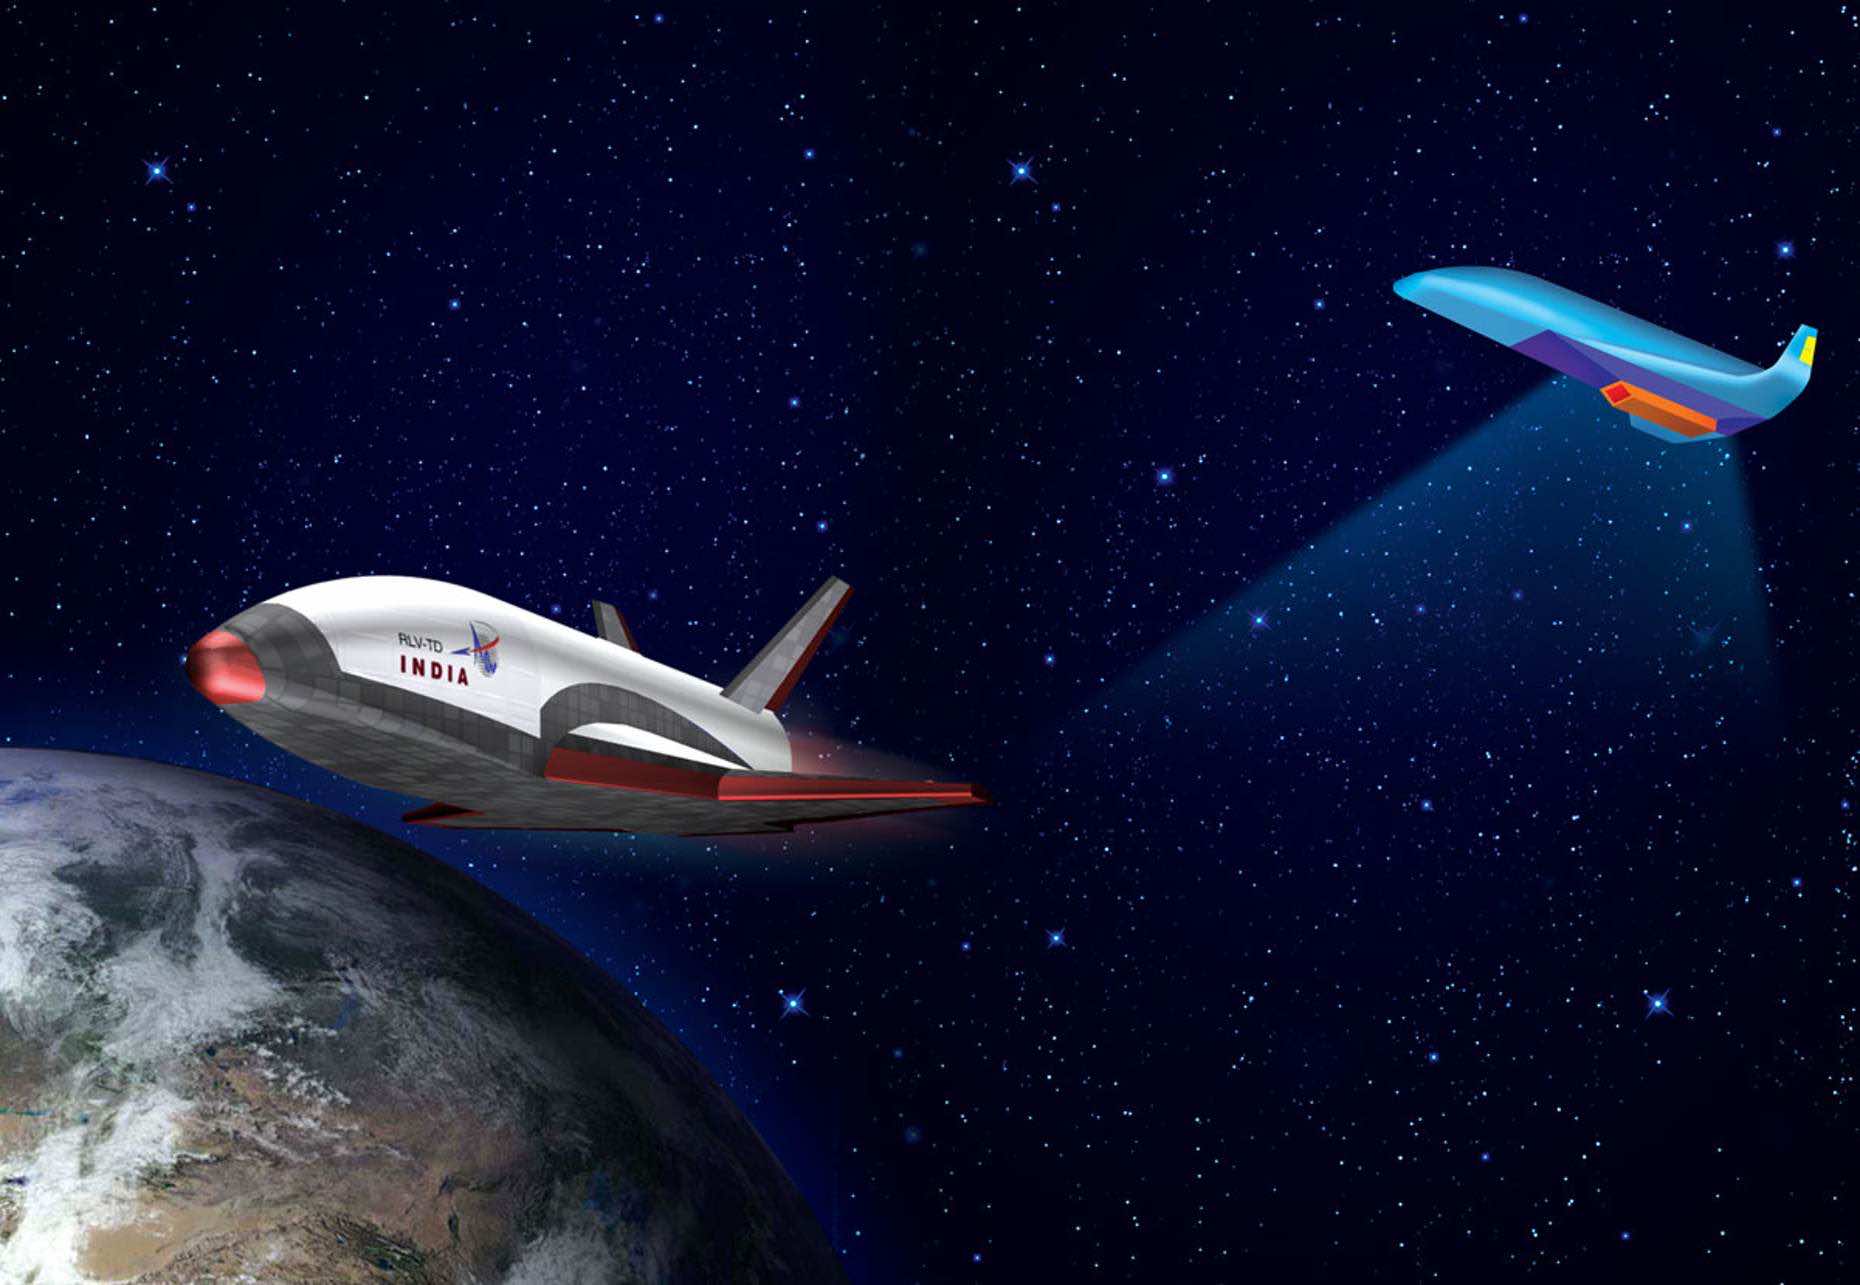 First Test Flight Of India’s Spaceplane Demonstrator Delayed Again